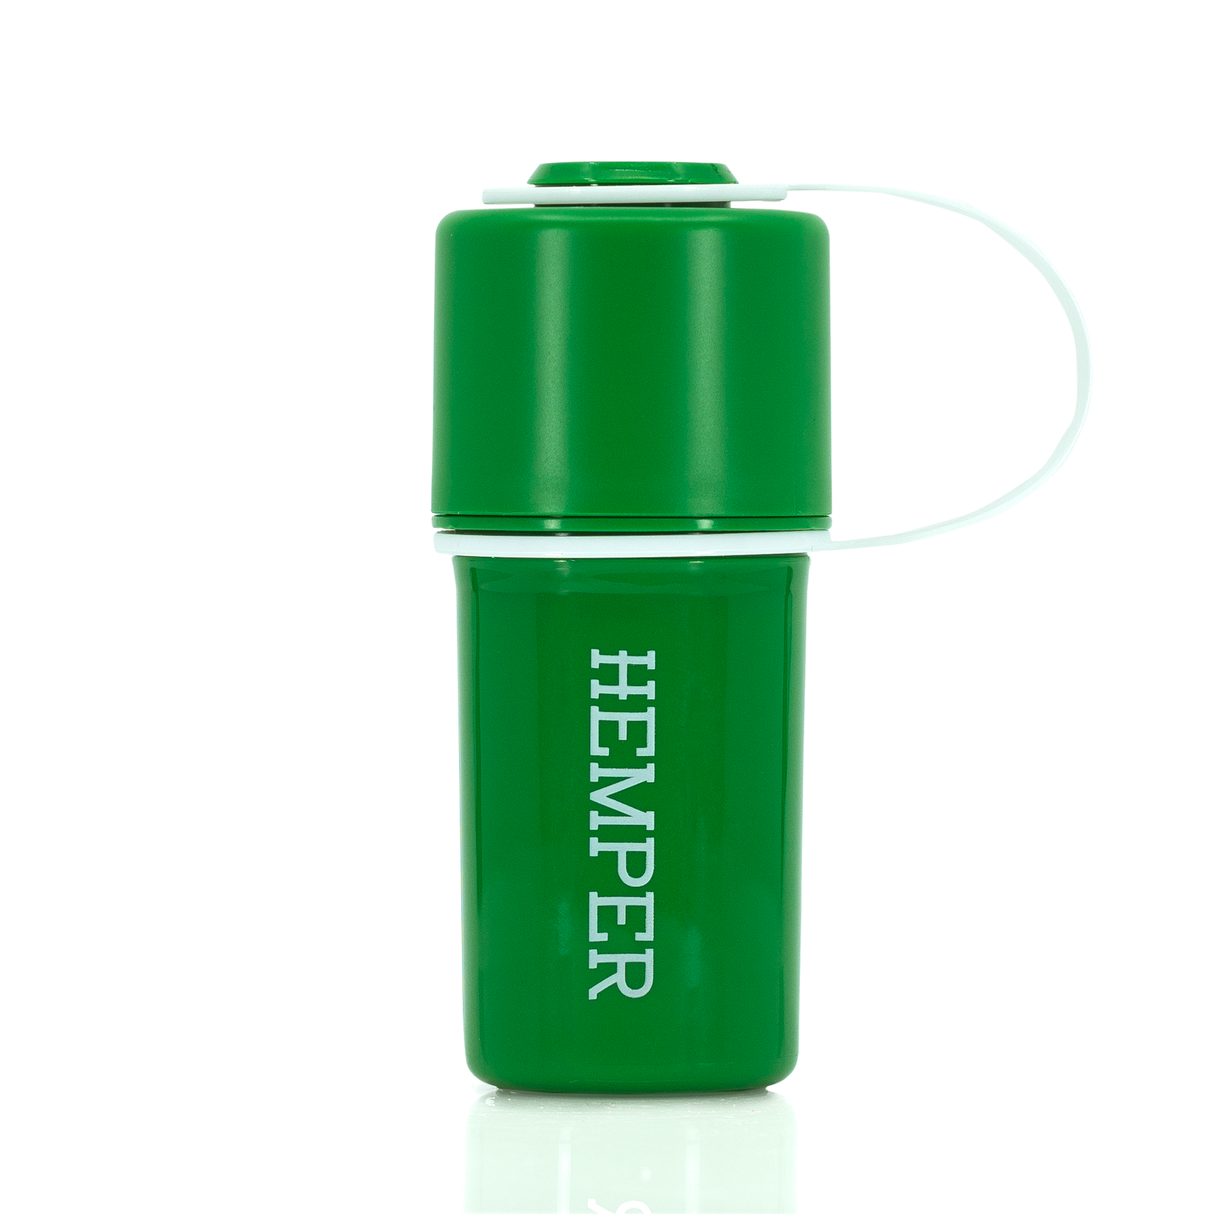 Hemper The Keeper™ 3-Part Grinder in Green with Built-in Storage - Front View